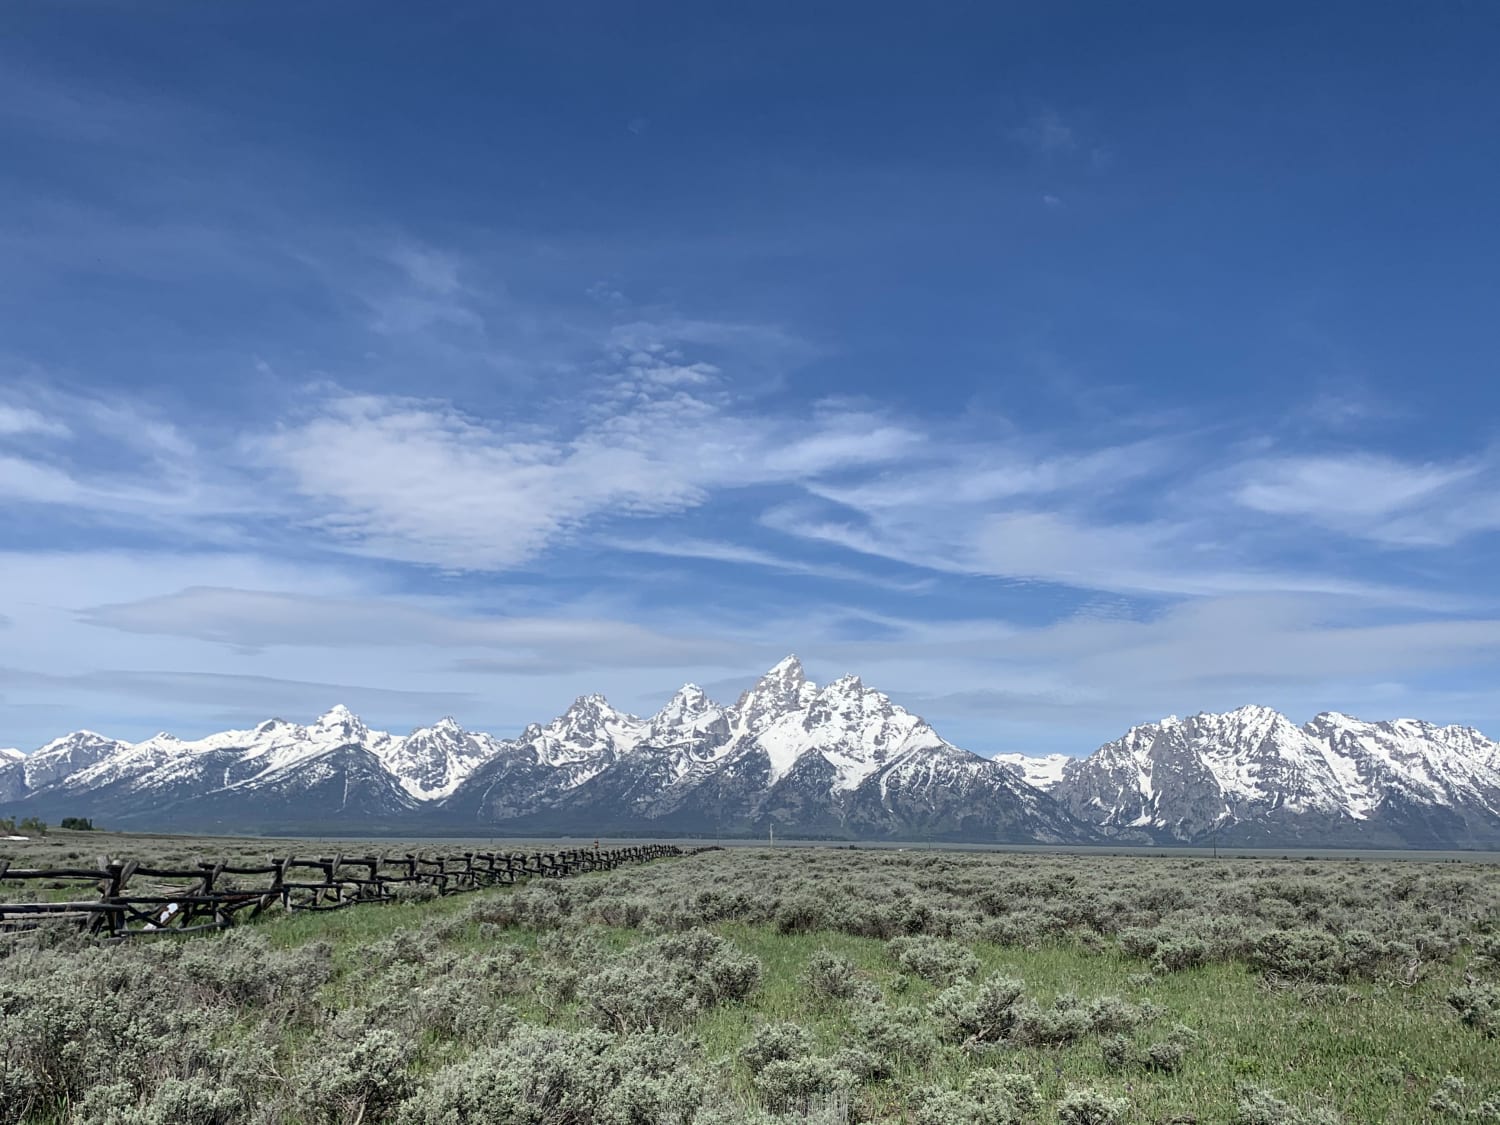 I raise you one iPhone XR Teton picture from June 1st.